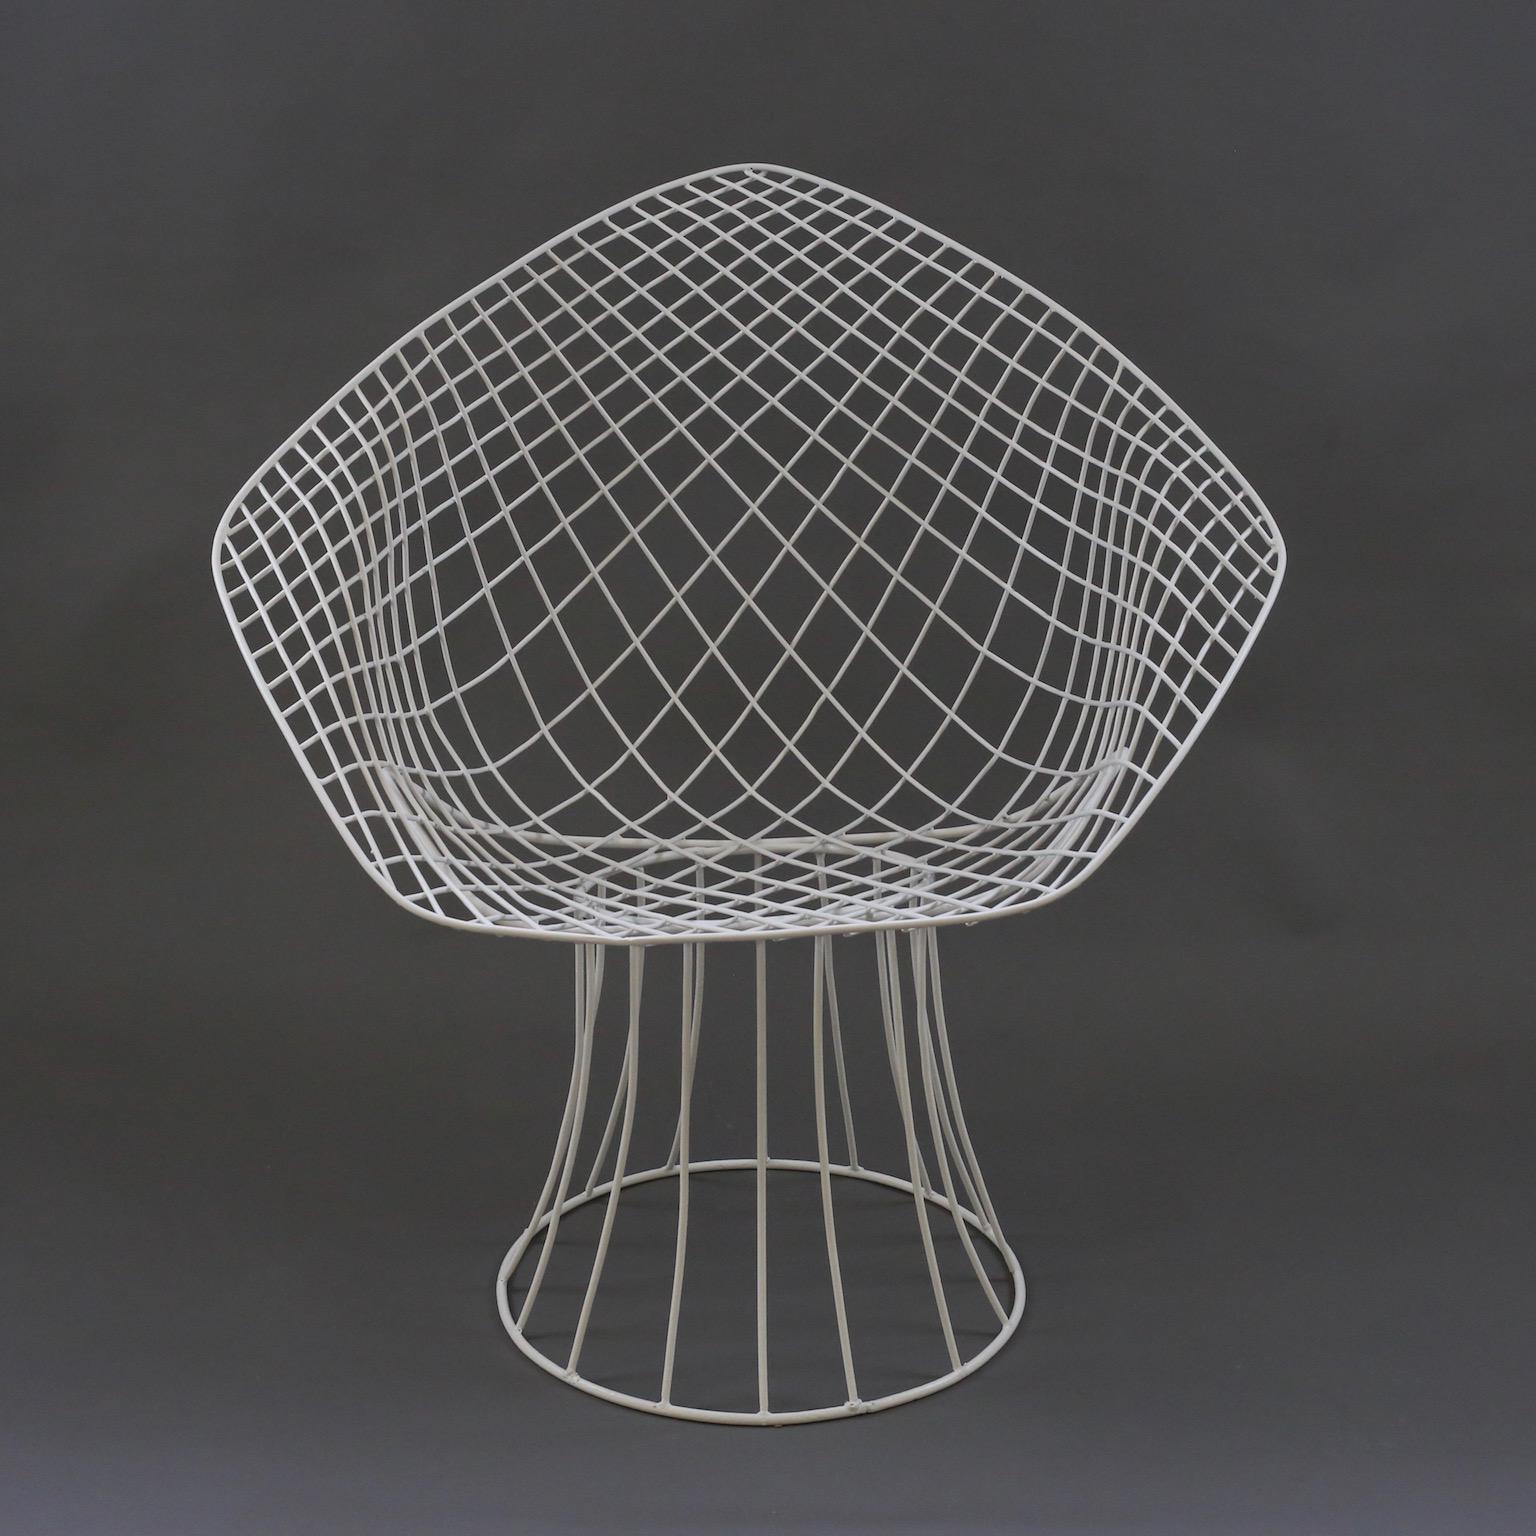 Early 1970s Harry Bertoia wire framed chairs made for Knoll. Original and absolutely fabulous. Outdoors or indoors these are highly desirable. They have been professionally refurbished and powder coated. Priced individually. Six available. Schultz